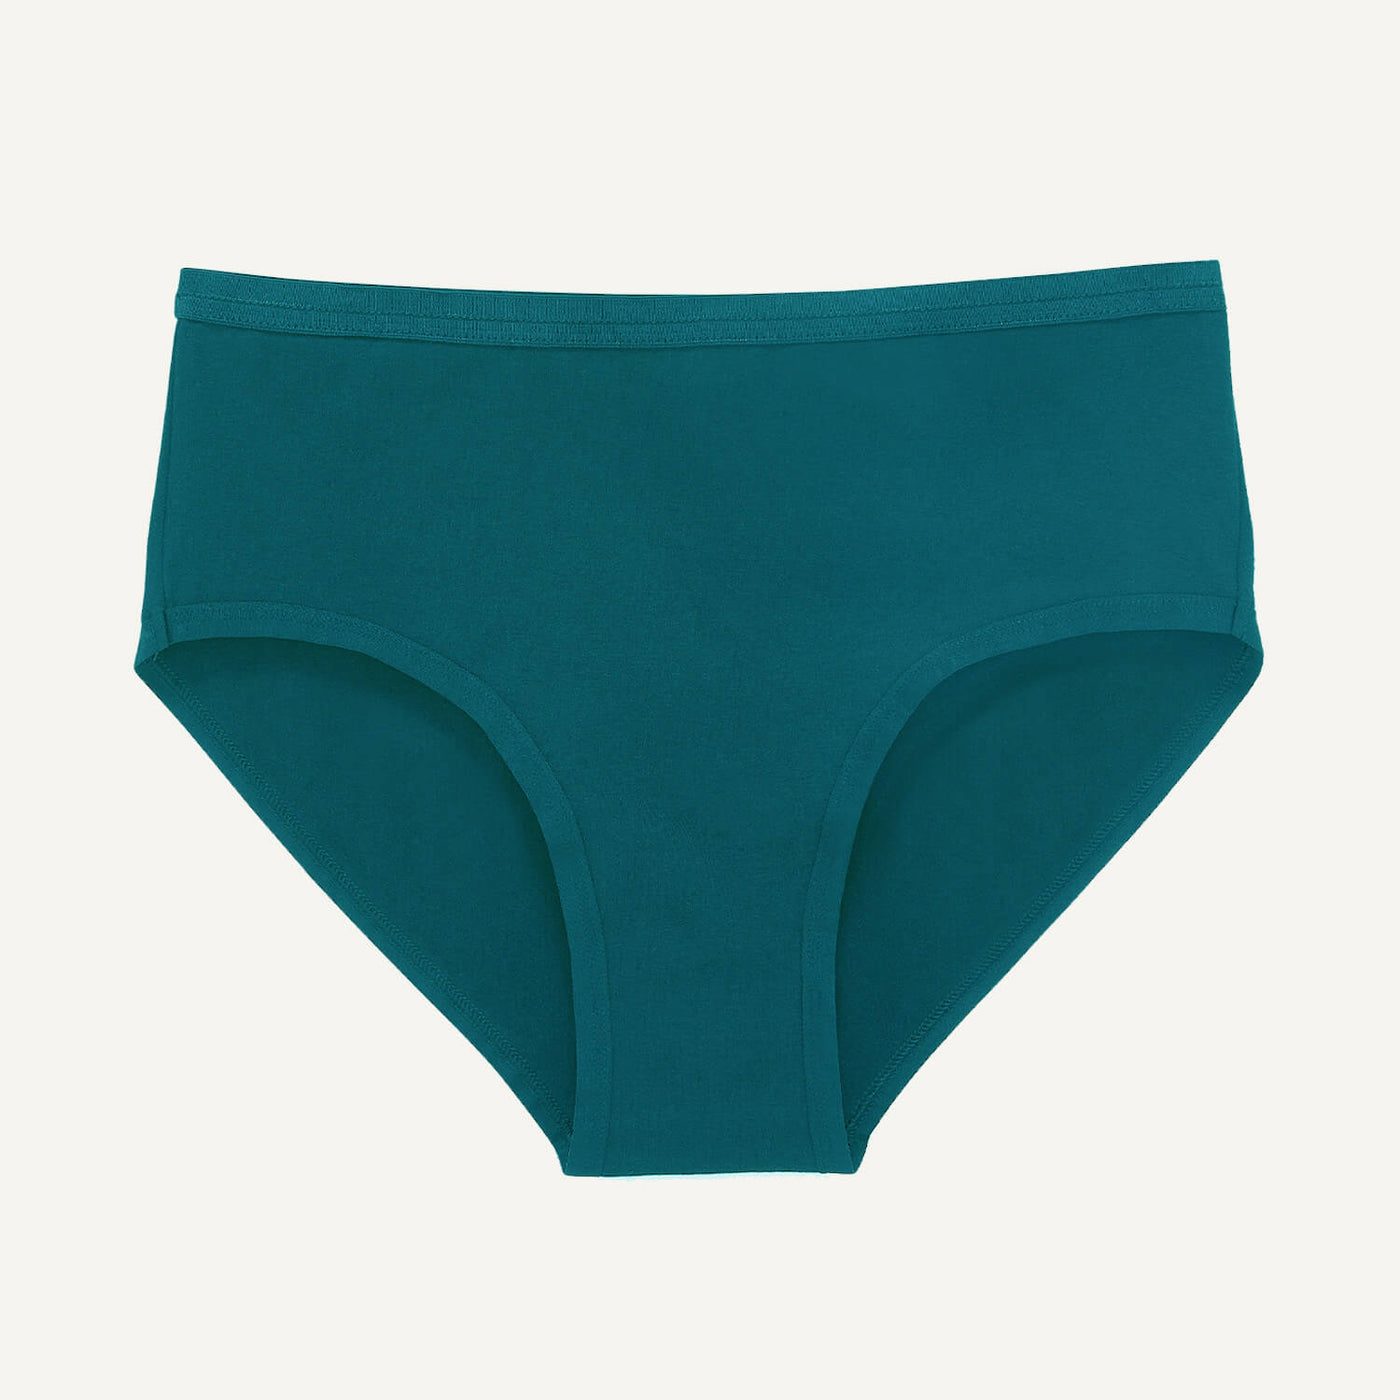 SALE Mid-Rise Brief in Pacific